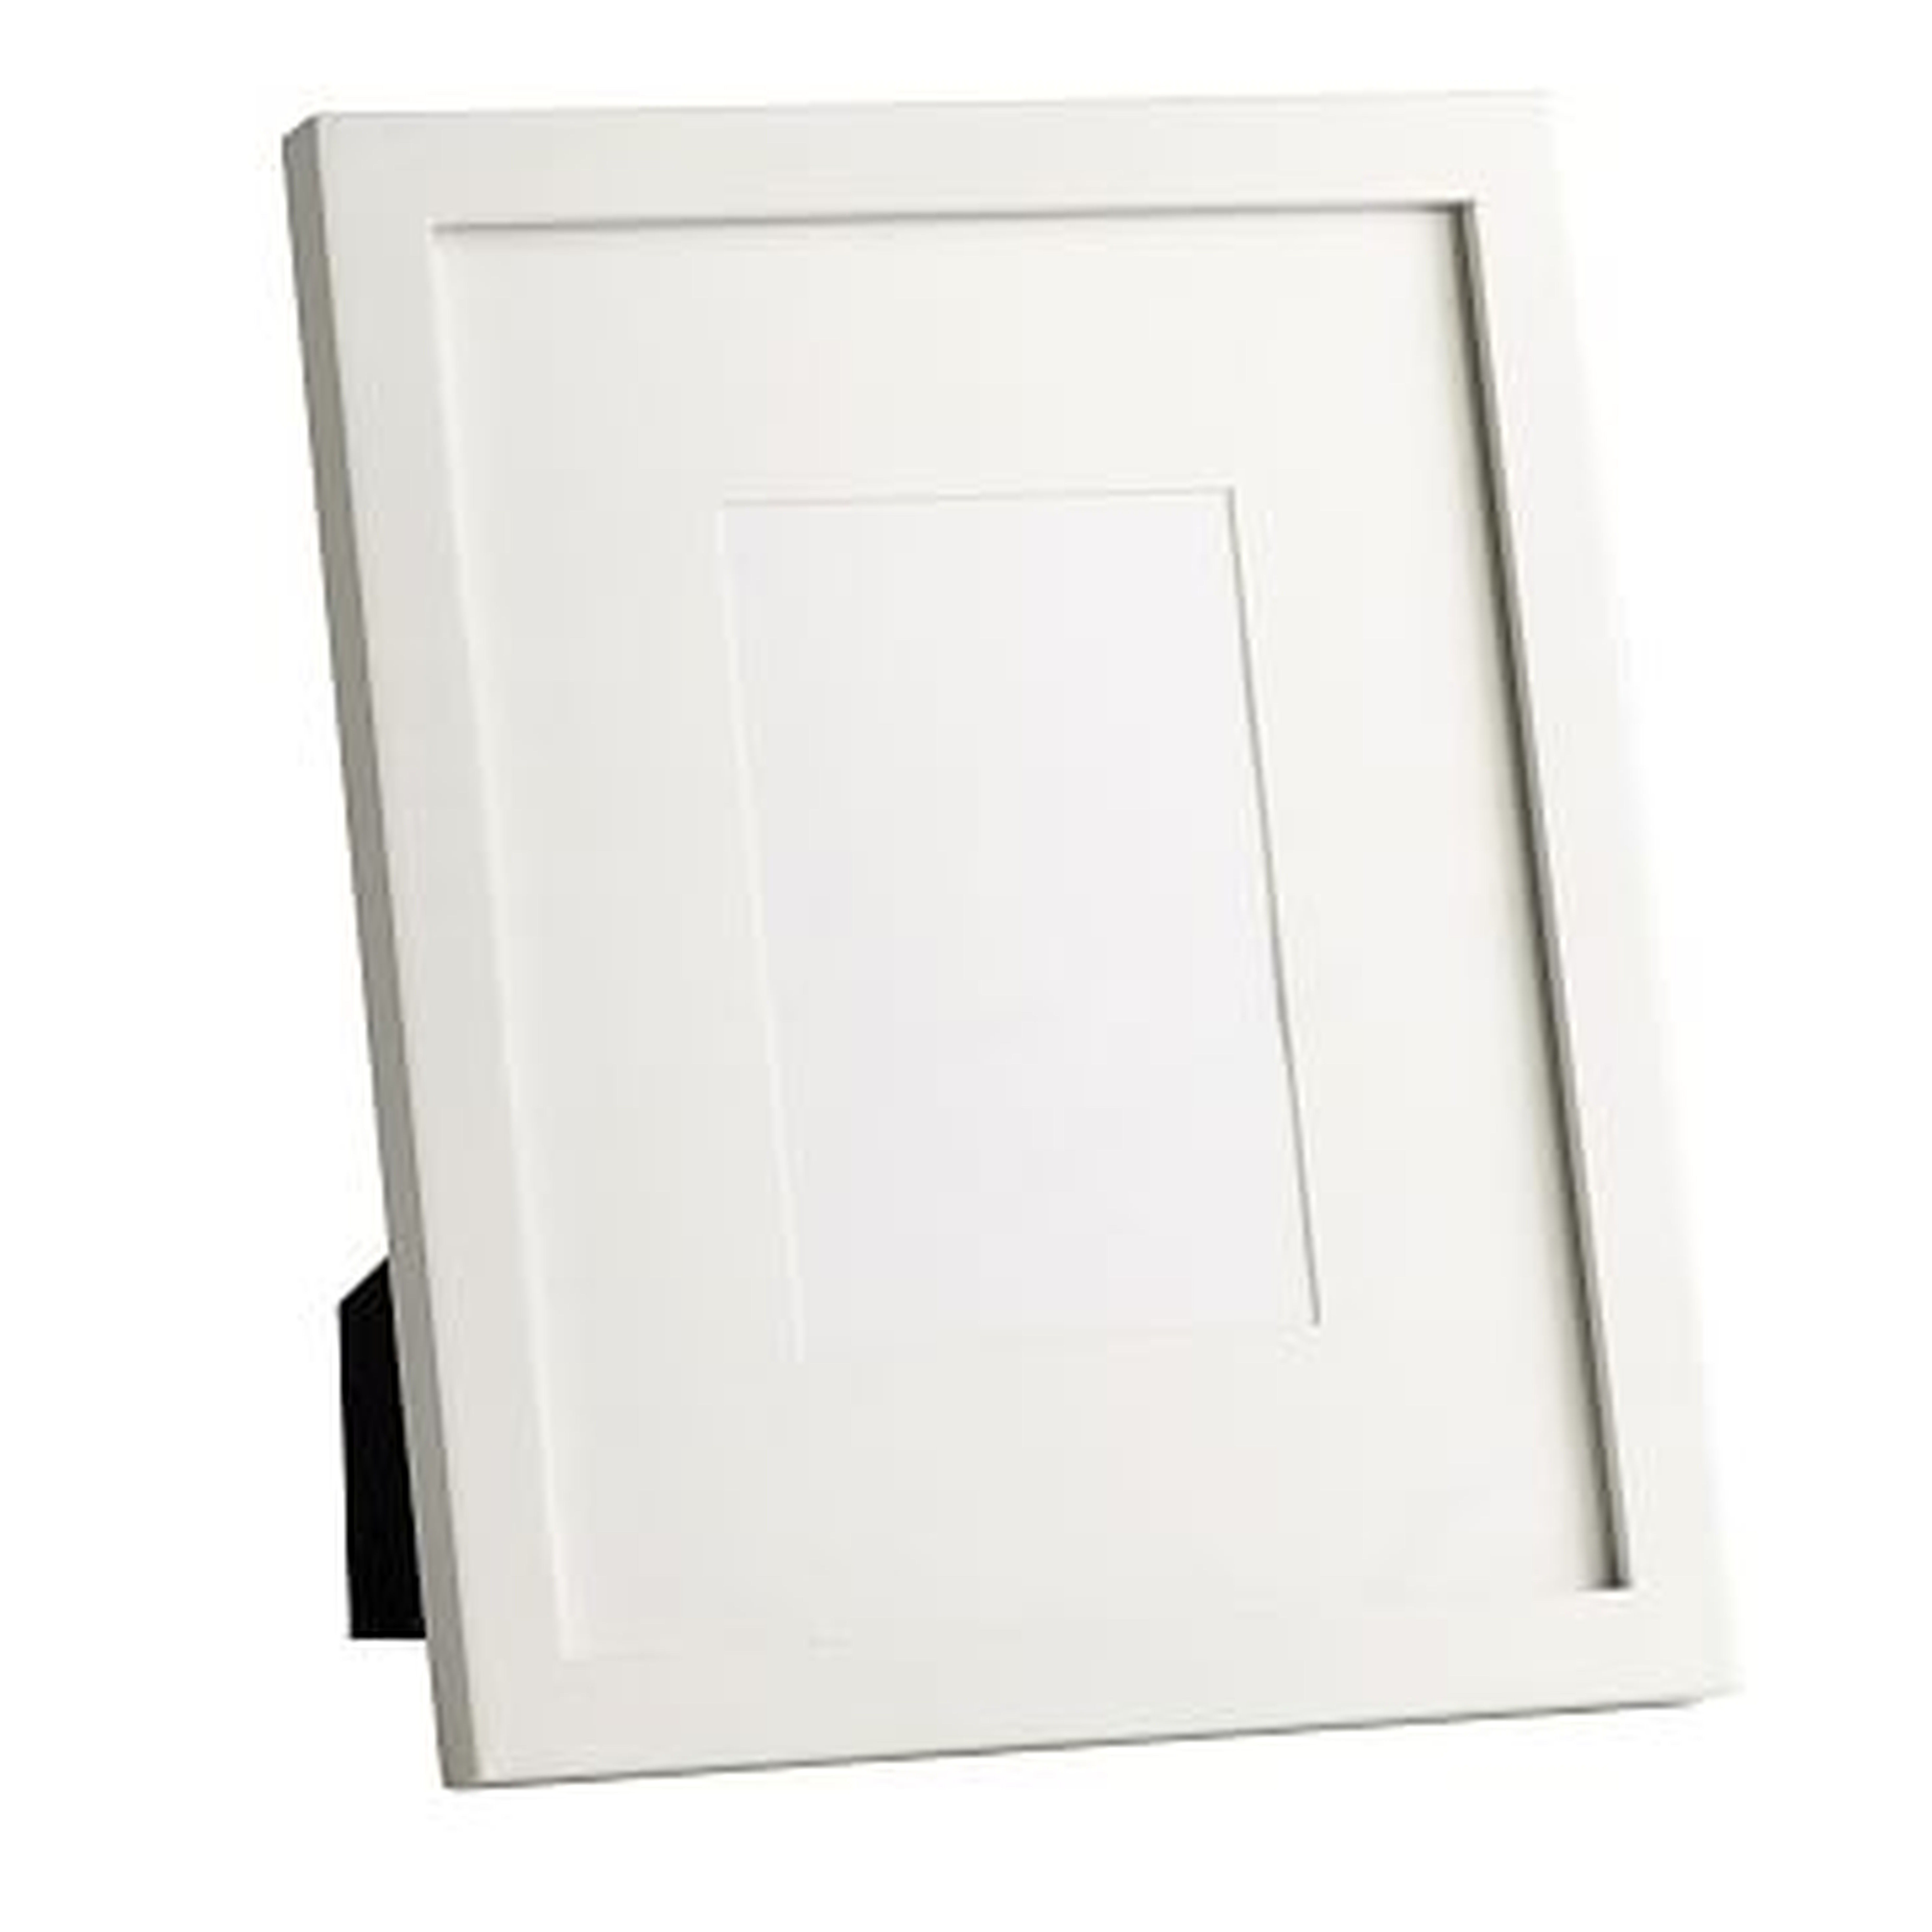 Gallery Frame, 4"x 6" (8" x 10" without mat), White Lacquer - West Elm